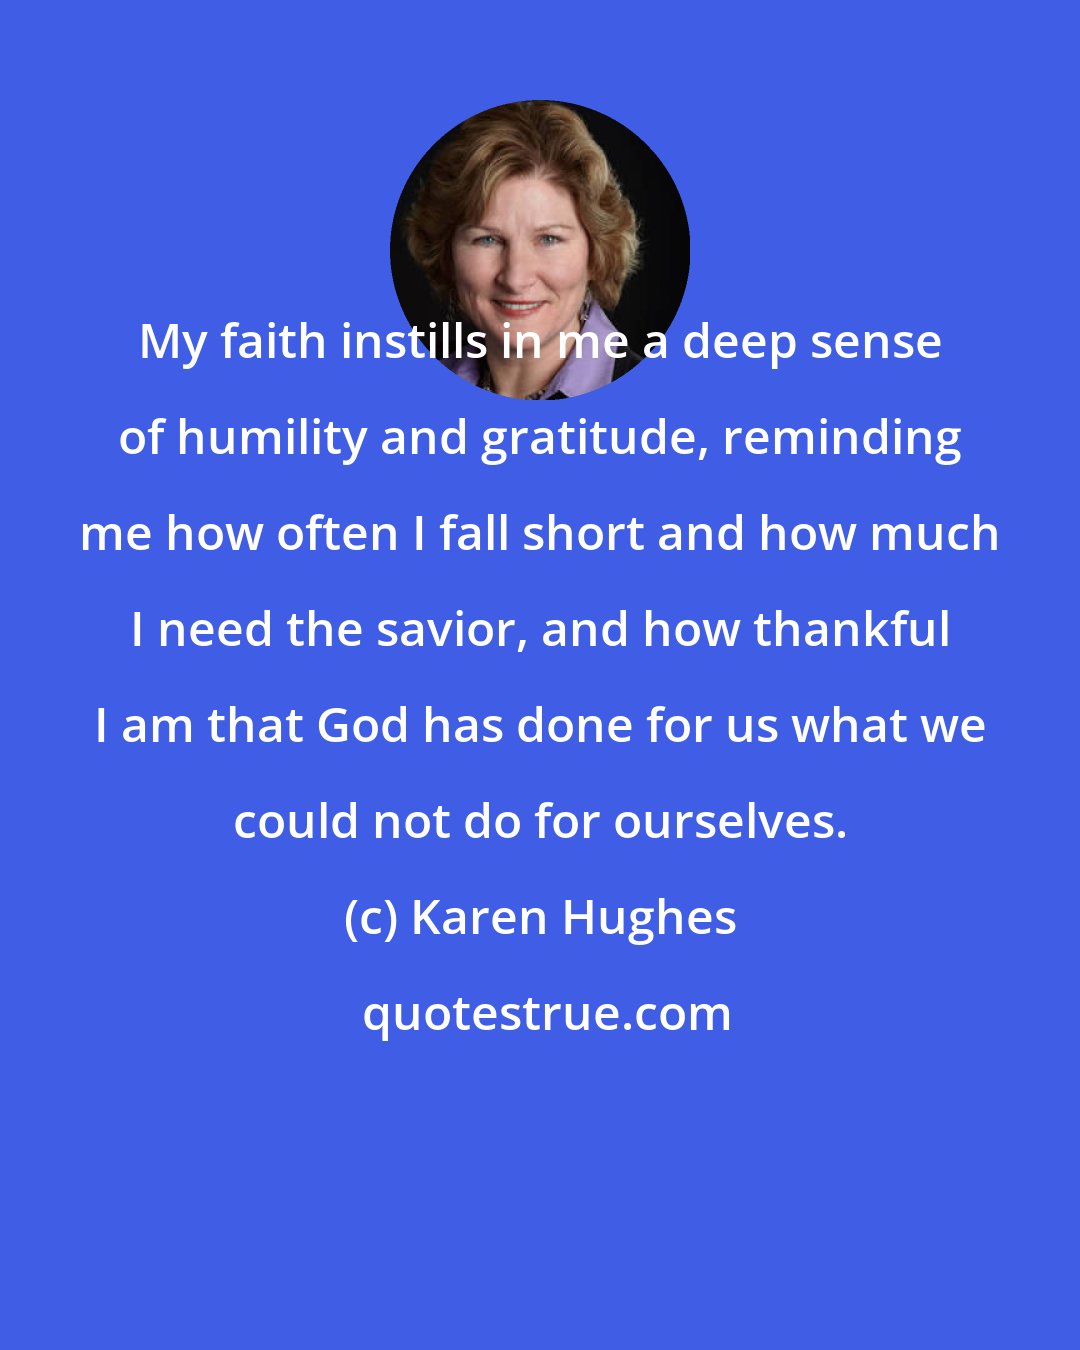 Karen Hughes: My faith instills in me a deep sense of humility and gratitude, reminding me how often I fall short and how much I need the savior, and how thankful I am that God has done for us what we could not do for ourselves.